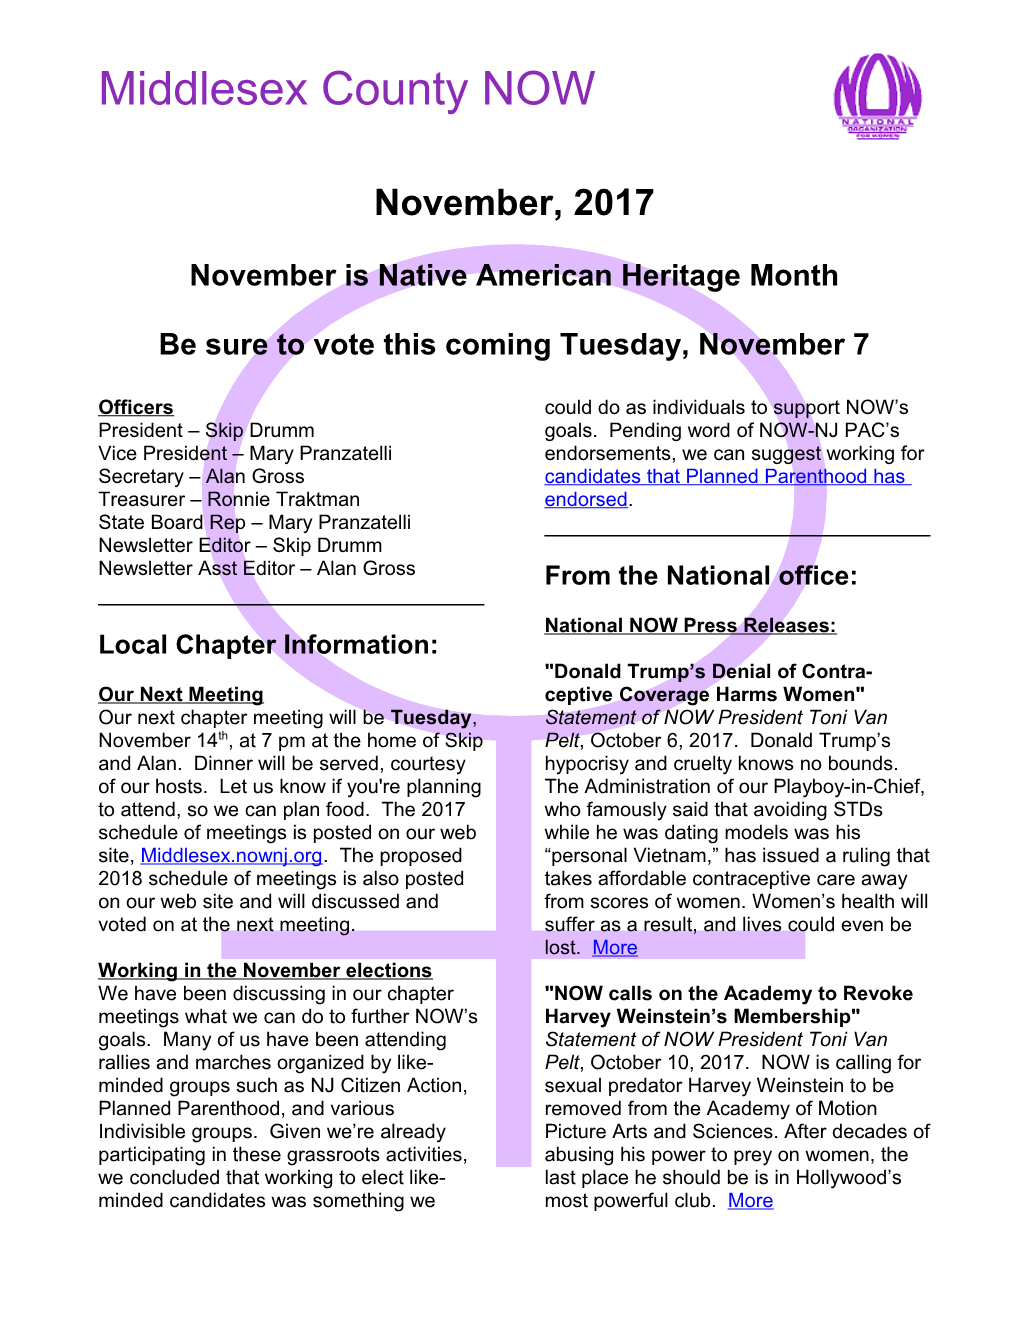 Middlesex County NOW Newsletter